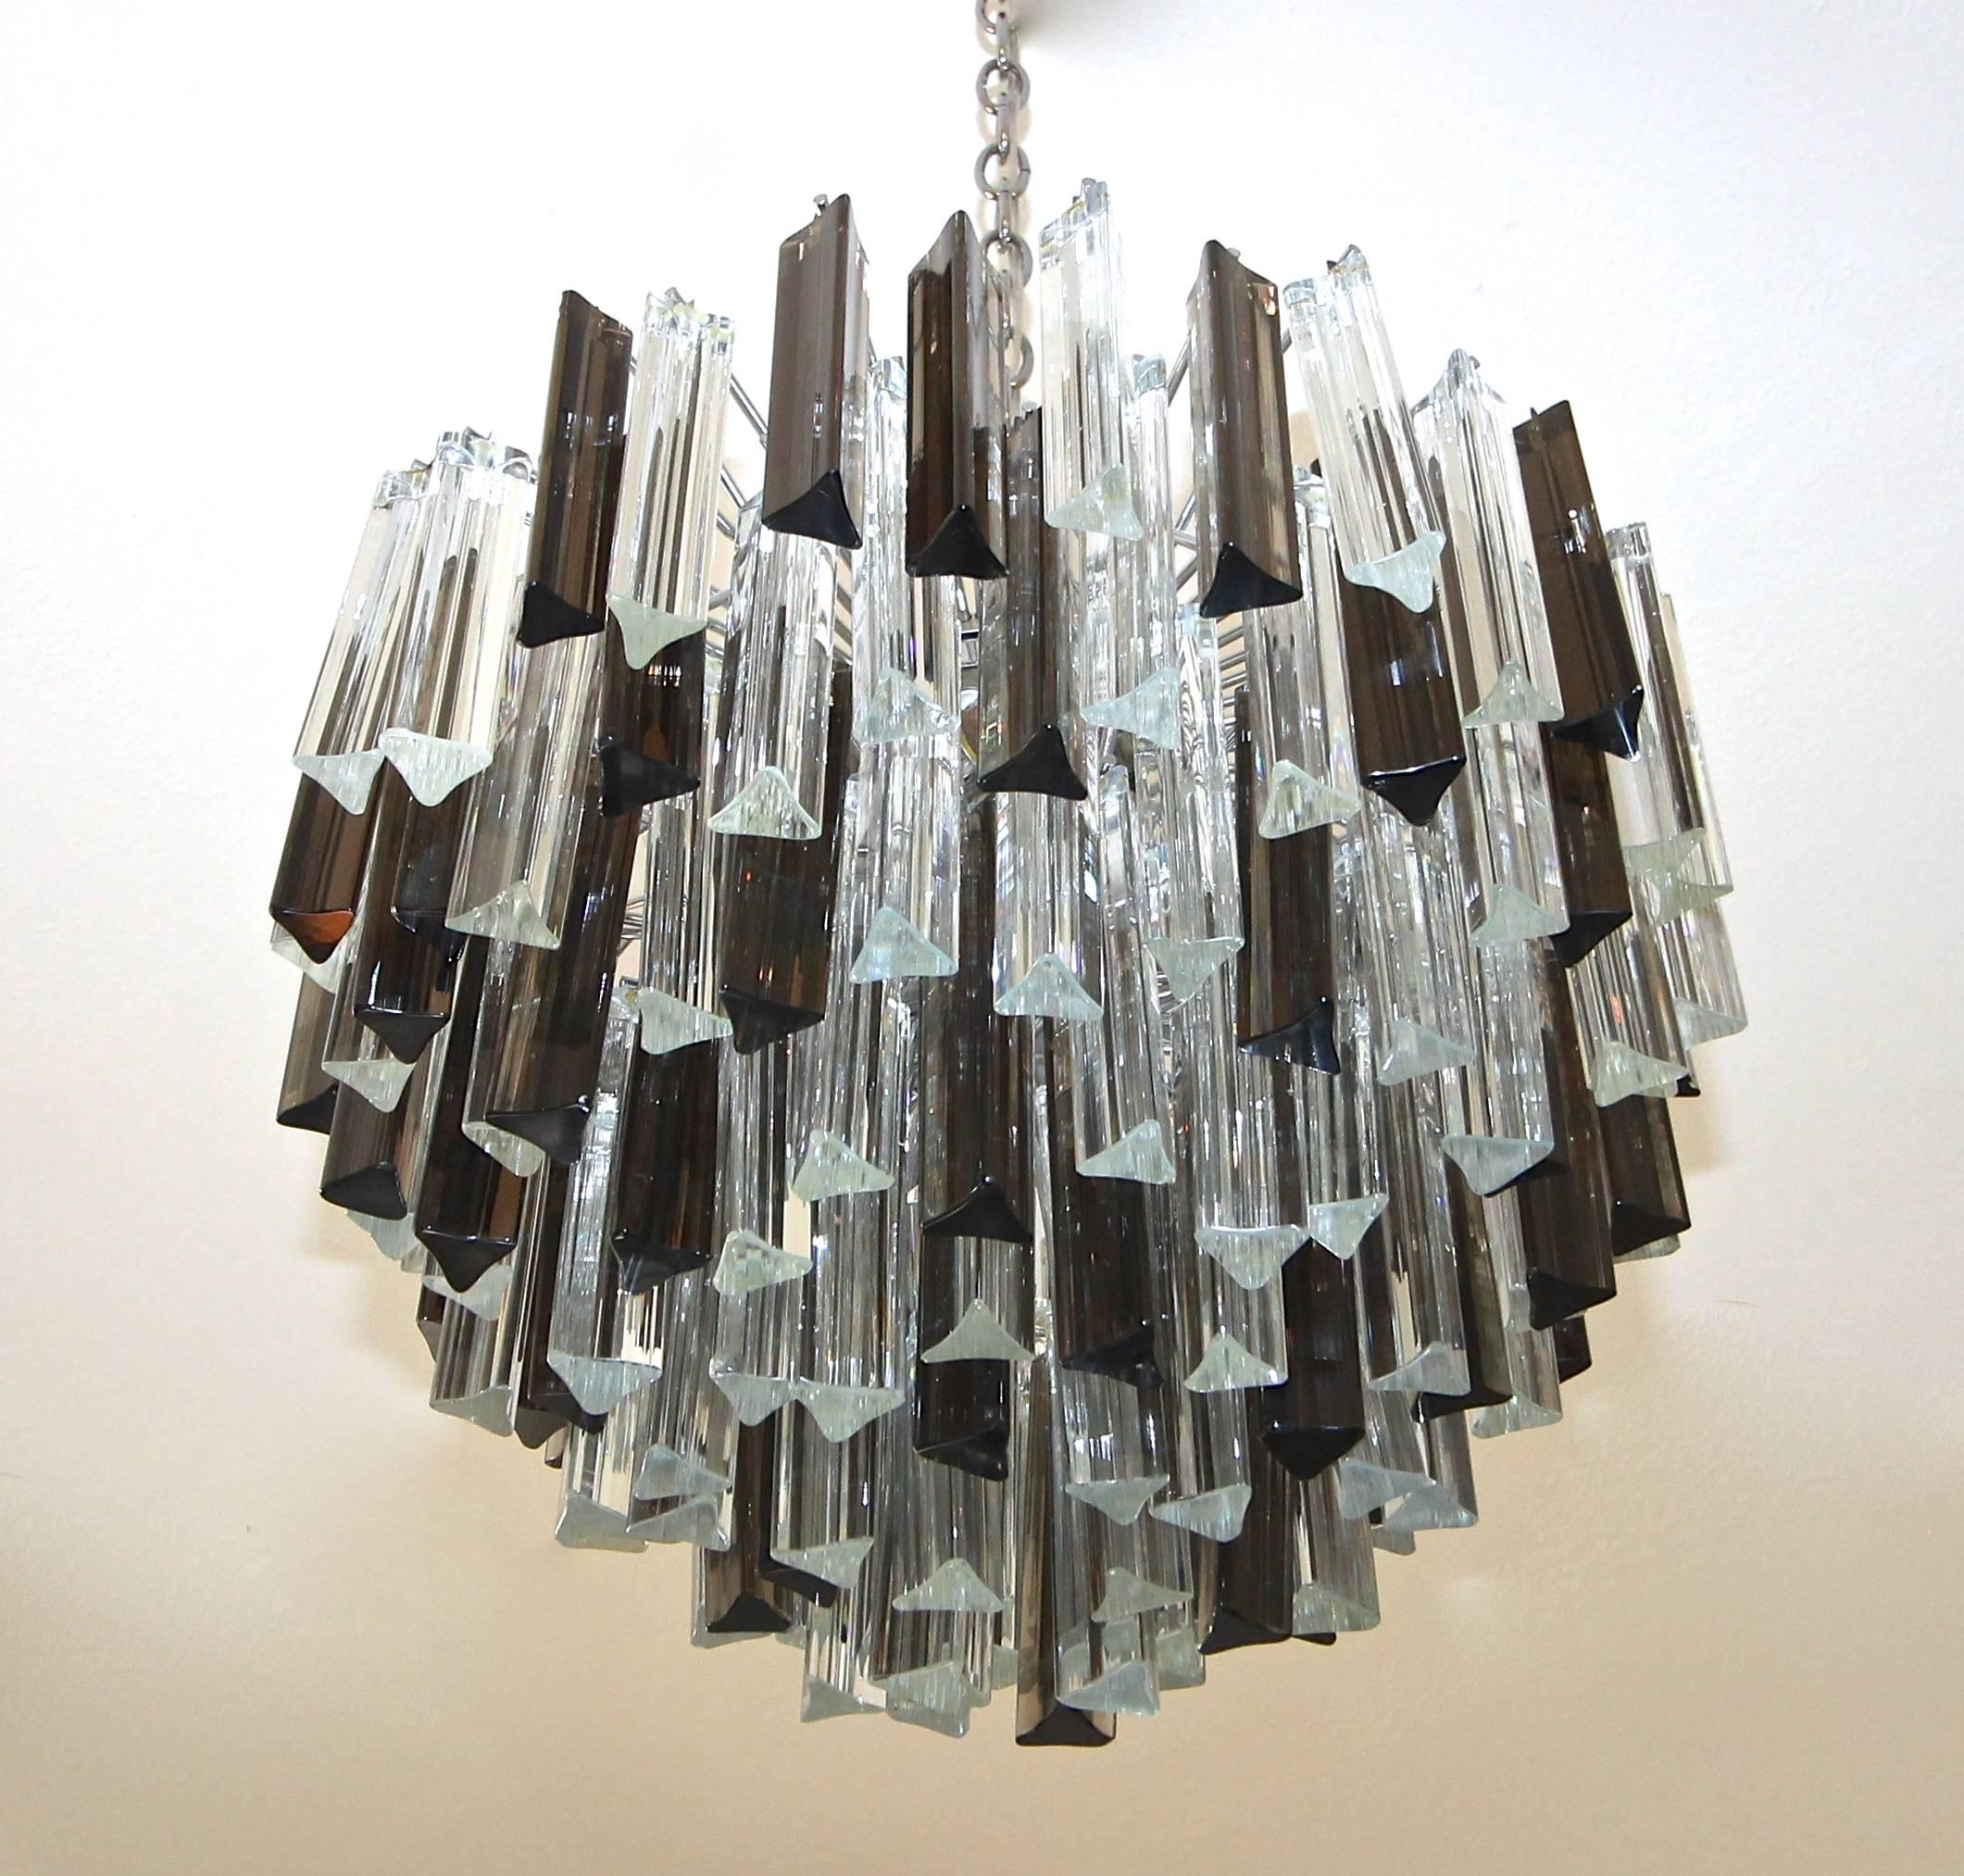 Round larger size multi-tier triedri glass chandelier with clear and smoke colored glass crystal prisms. Newly chrome-plated heavily constructed steel frame. Great vintage Italian Murano design in the manner of Venini and manufactured by Camer